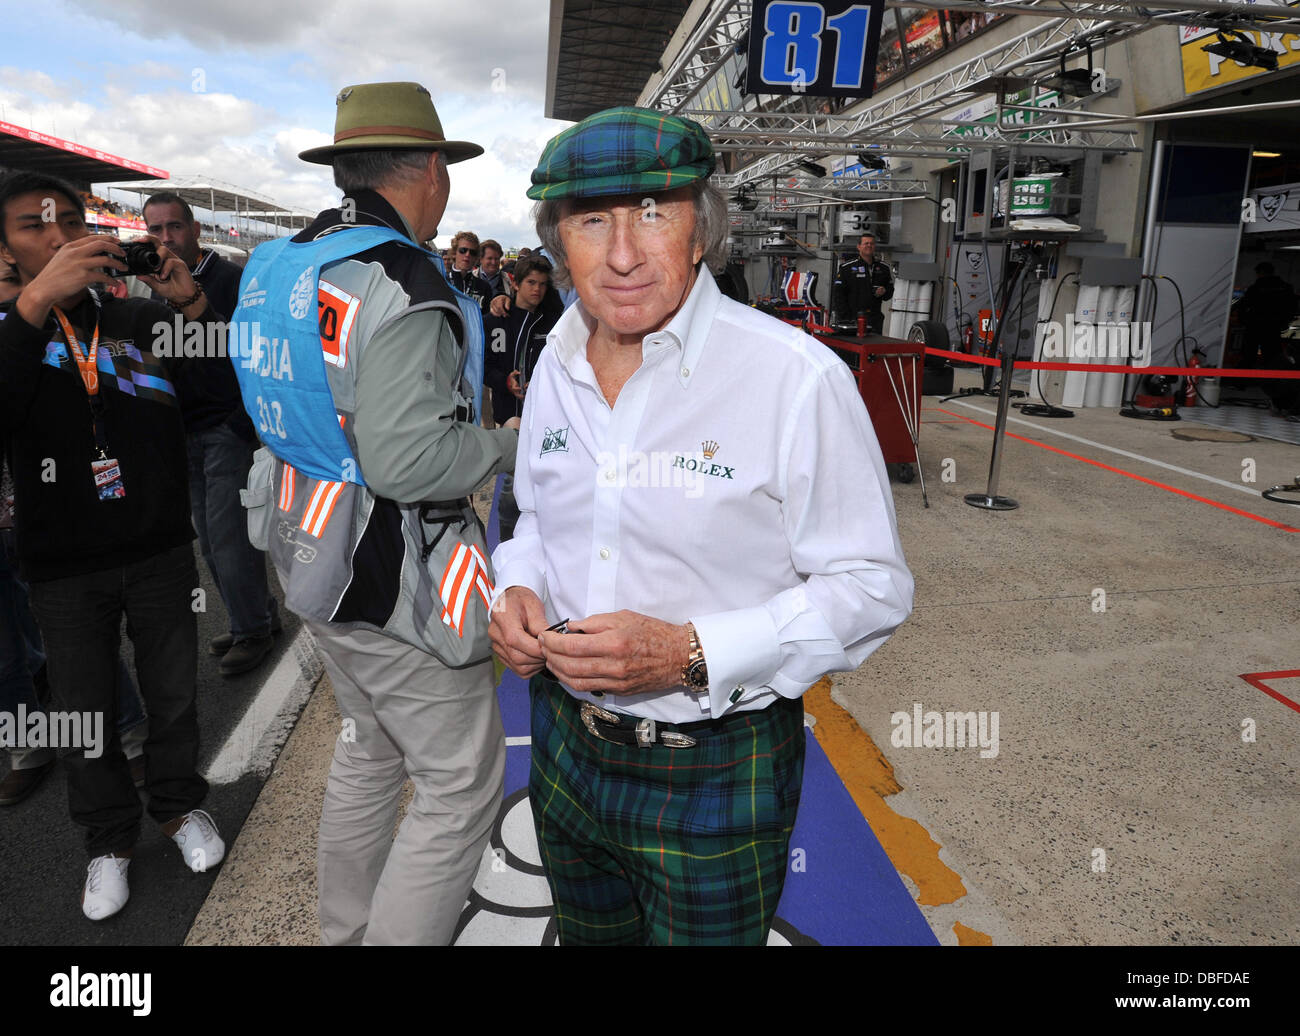 Sir Jackie Stewart Scenes from the first racing day at Le Mans 24 hour. Le Mans, France - 11.06.11 Stock Photo